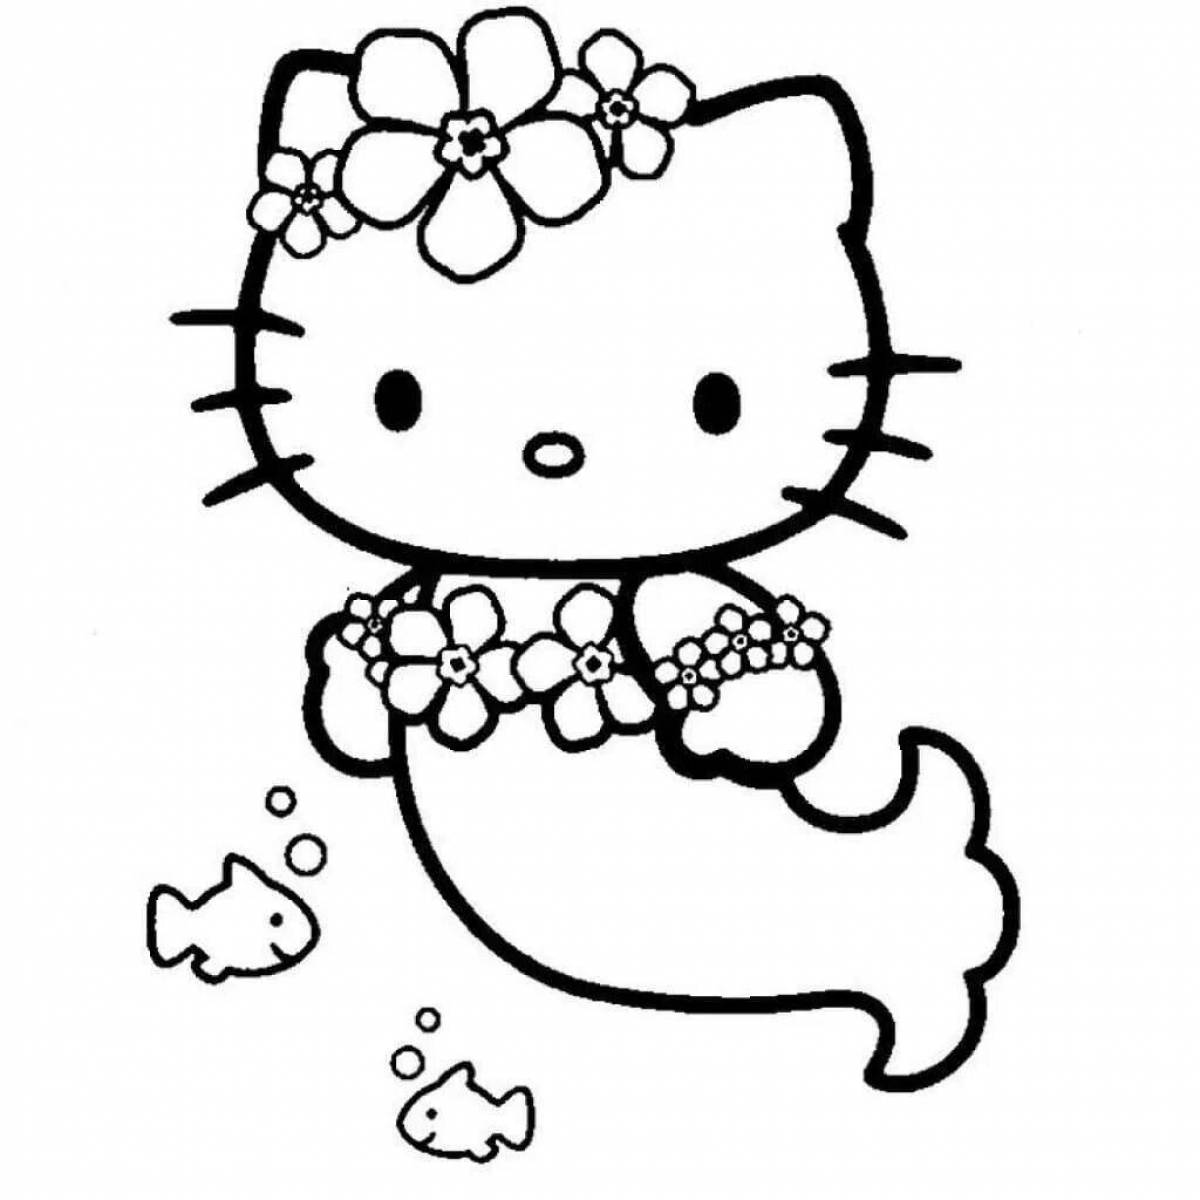 Astro kitty funny coloring book